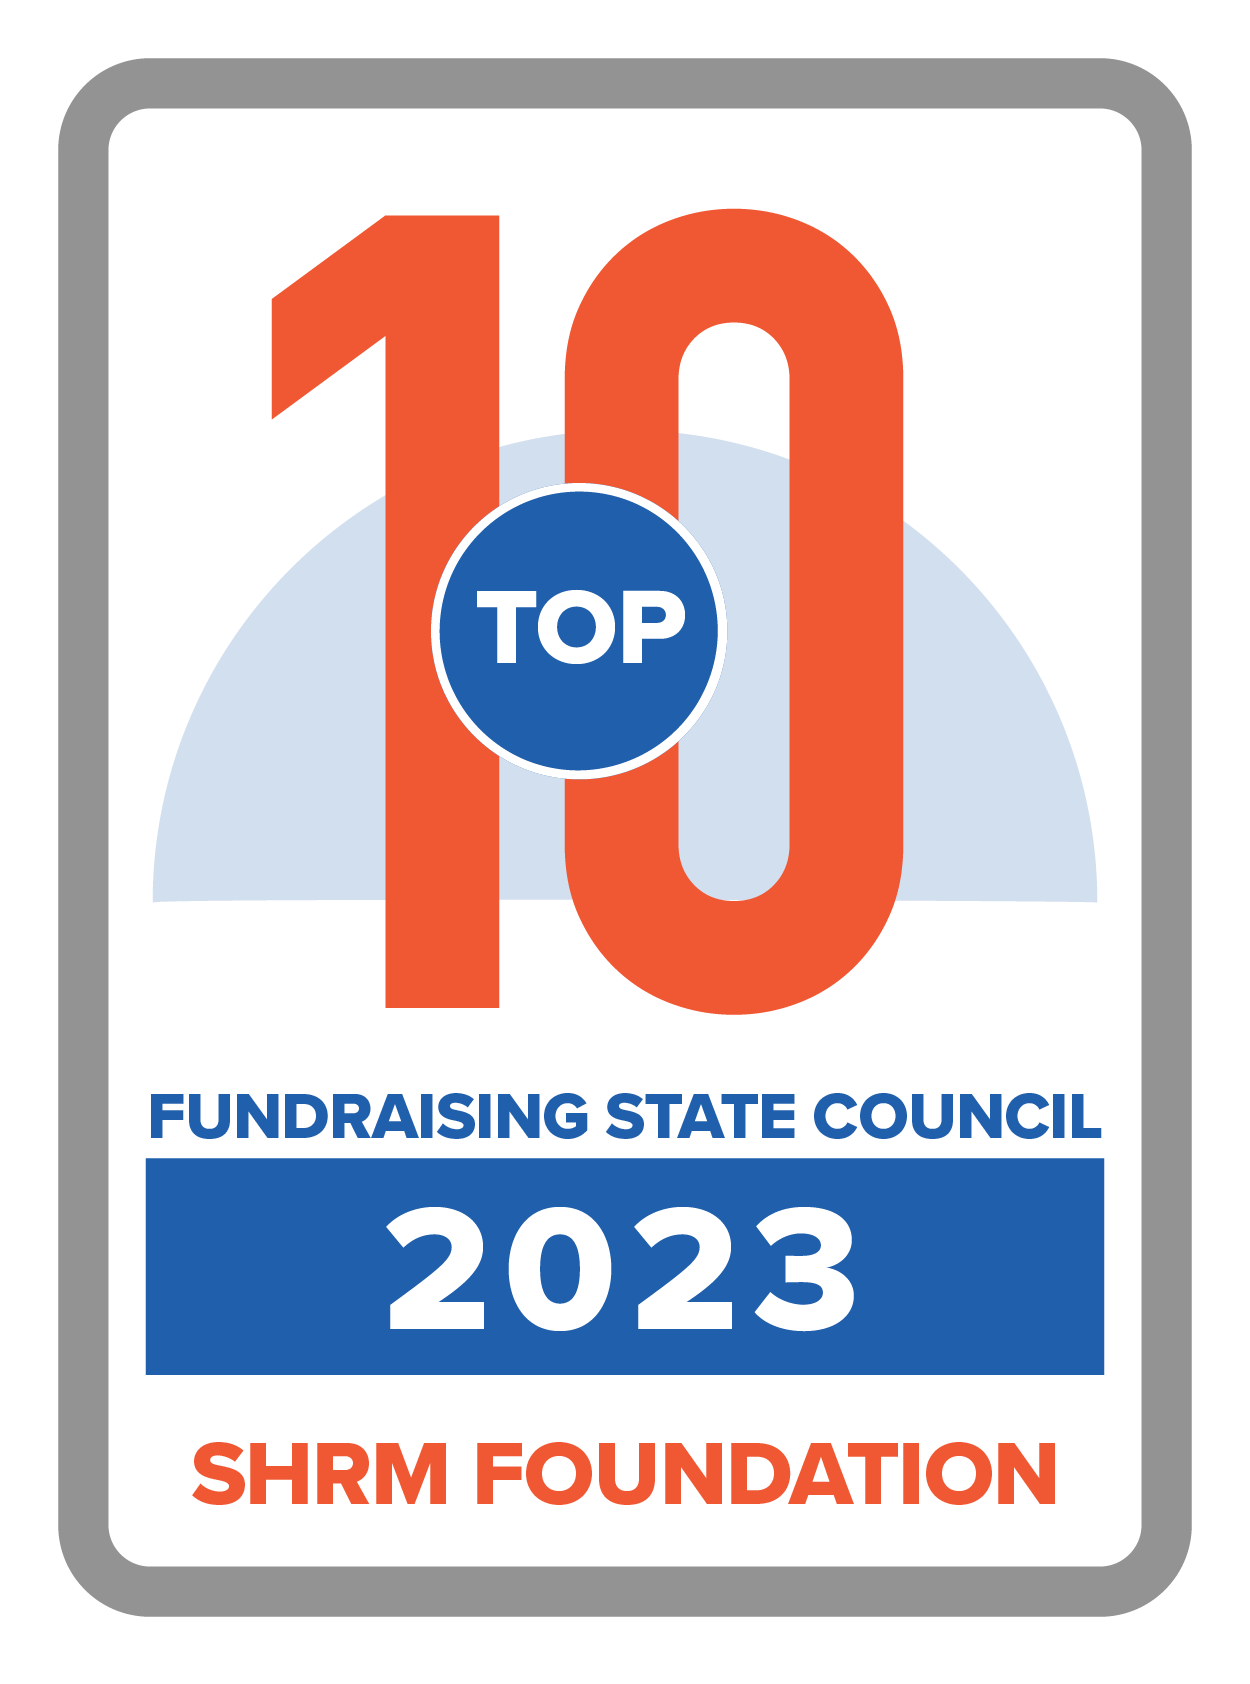 Top 10 Fundraising State Councils - SHRM Foundation